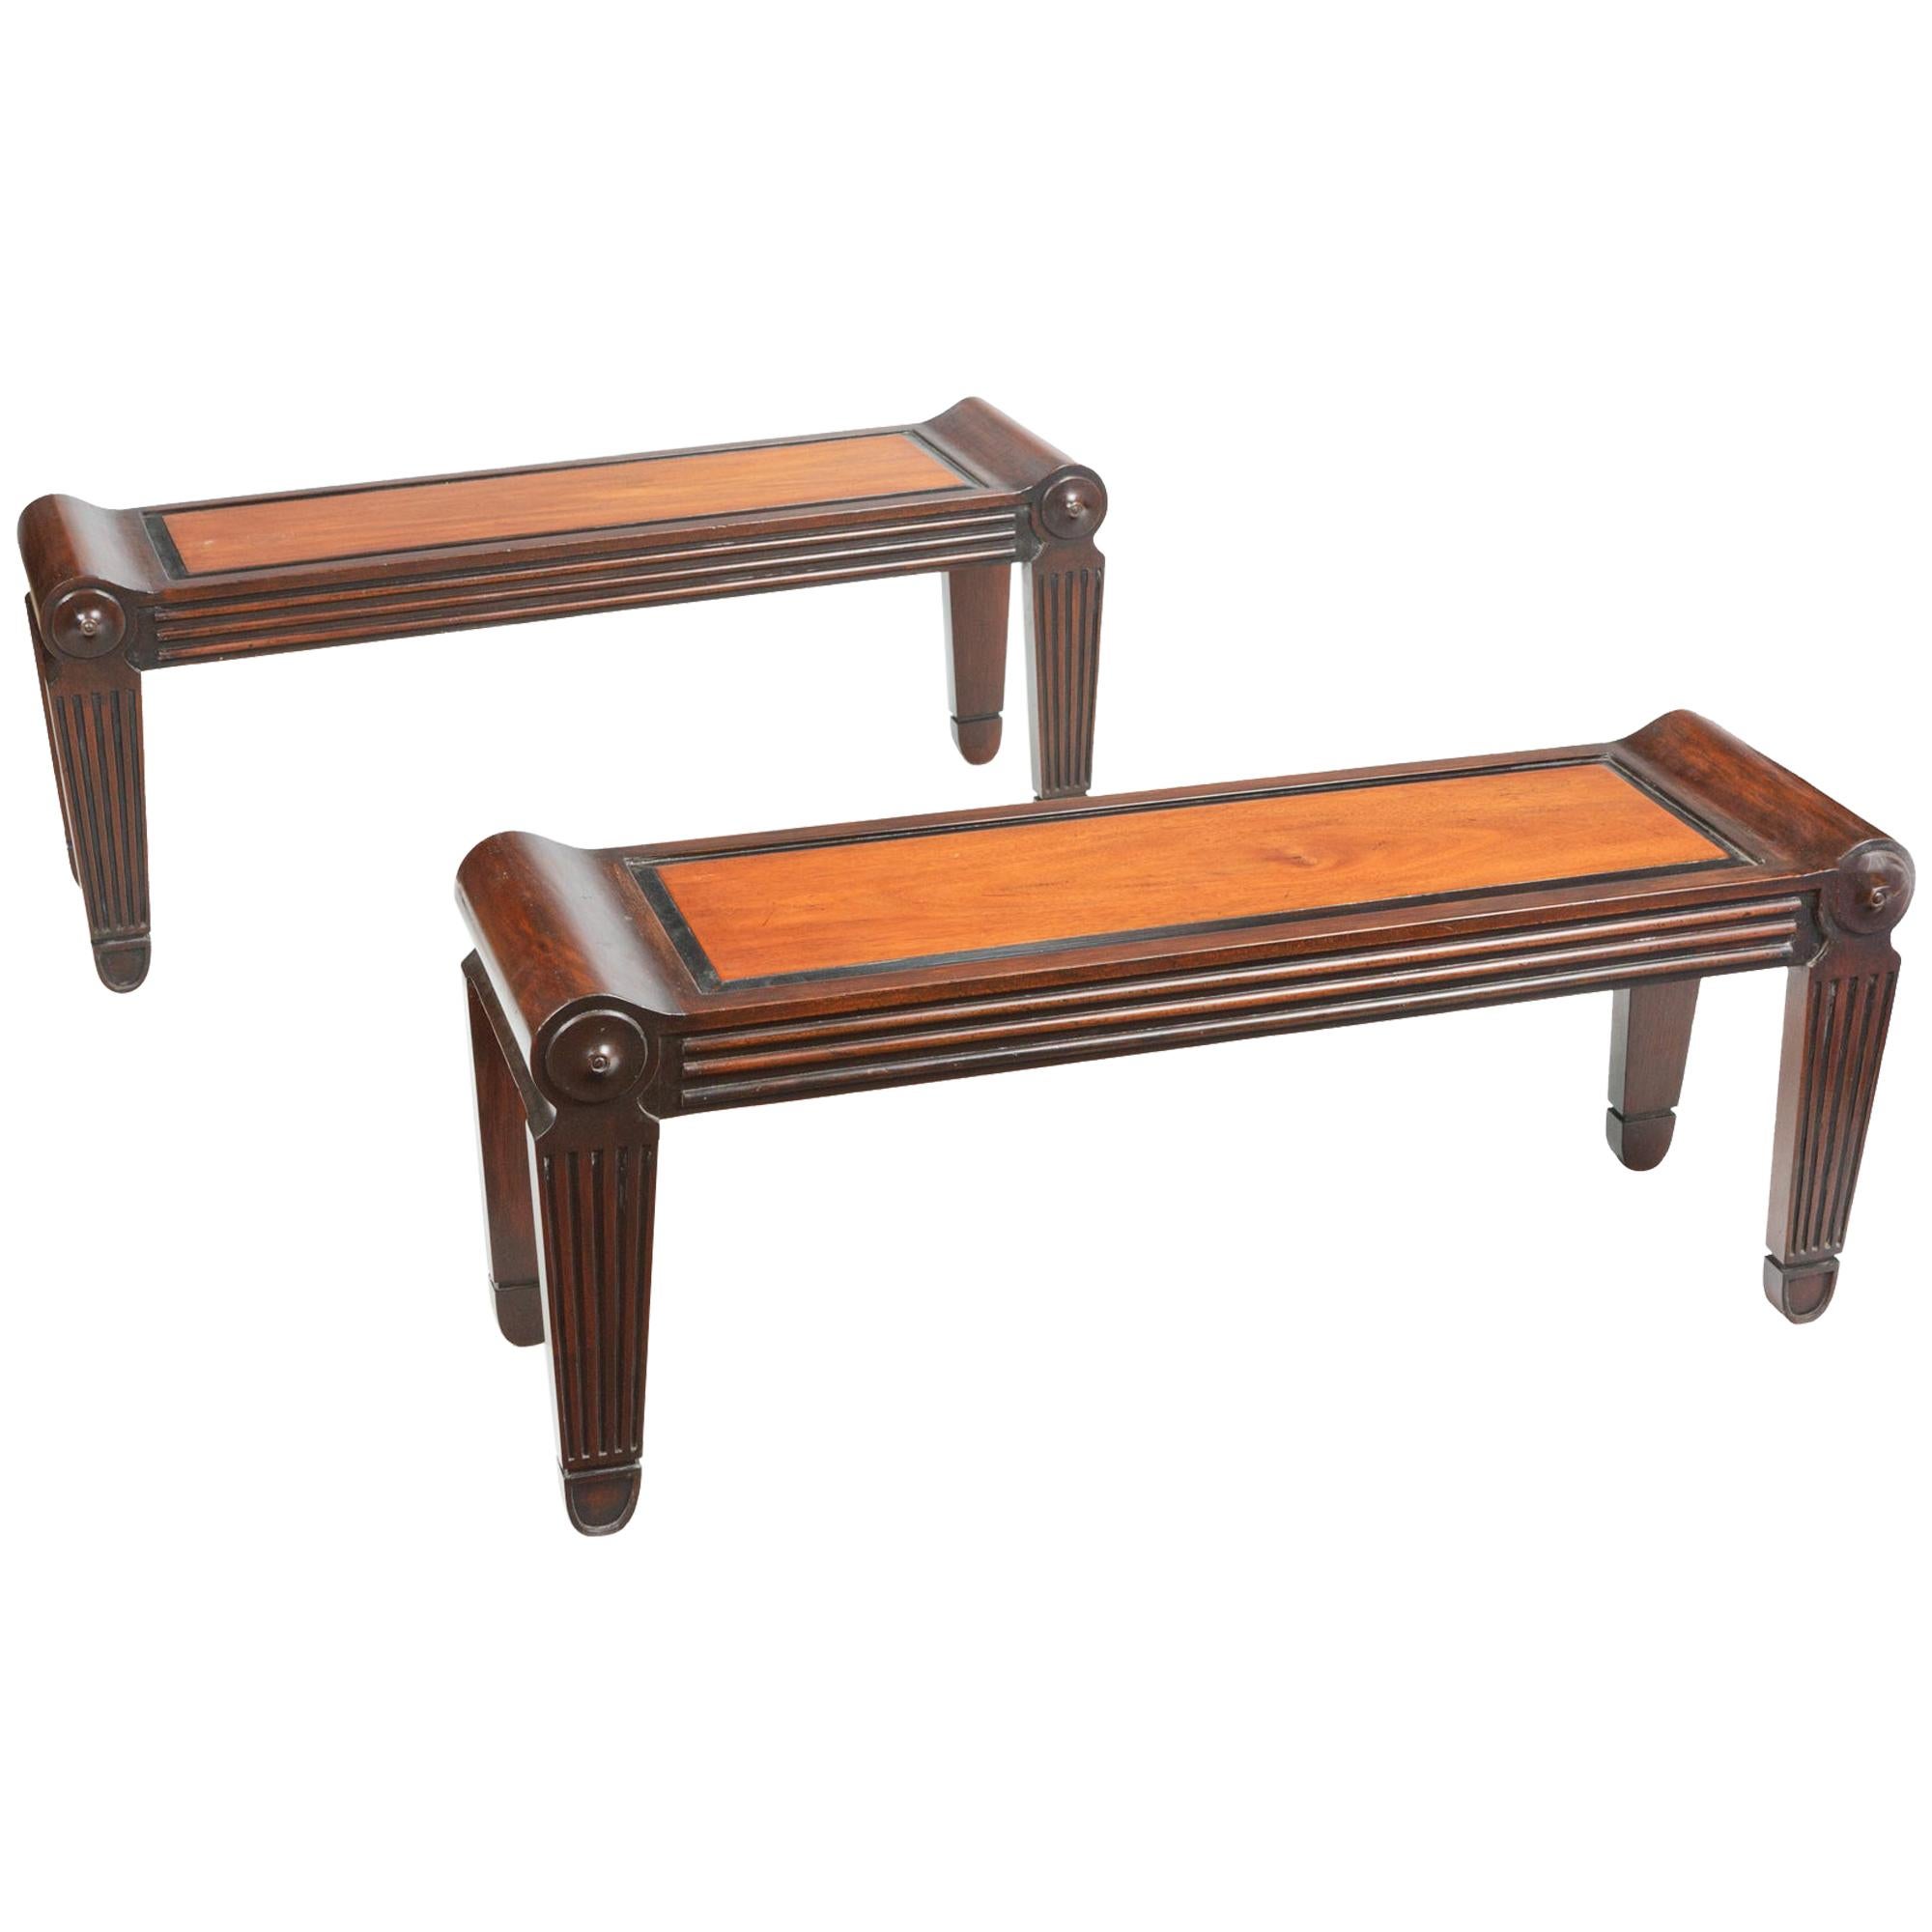 19th Century Pair of Tatham Hall Benches after Charles Heathcote Tatham For Sale